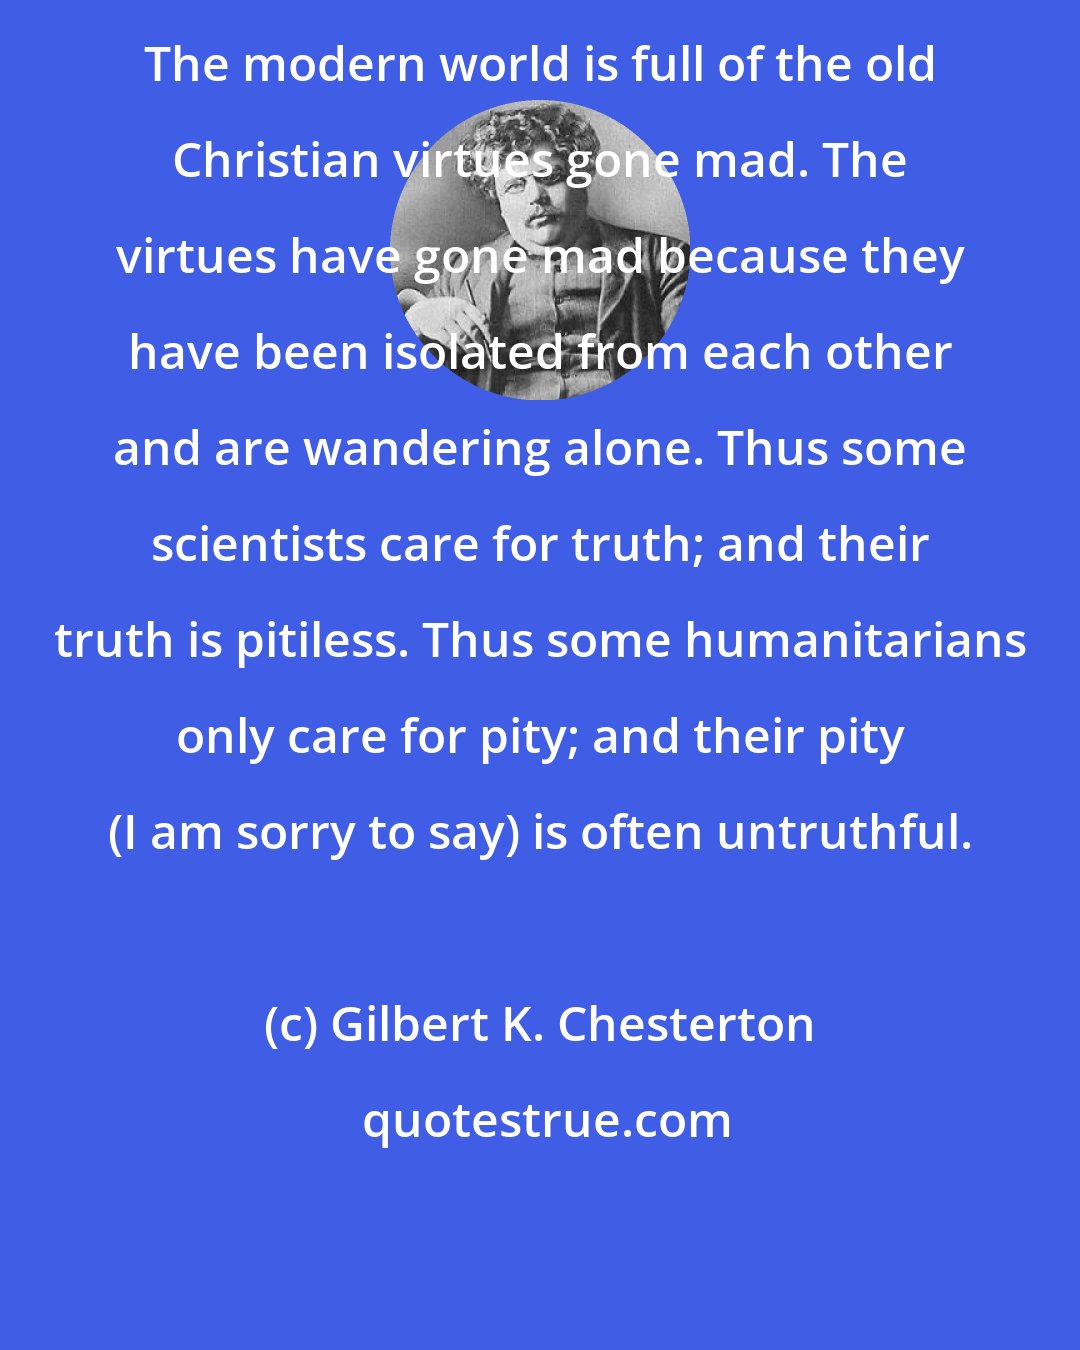 Gilbert K. Chesterton: The modern world is full of the old Christian virtues gone mad. The virtues have gone mad because they have been isolated from each other and are wandering alone. Thus some scientists care for truth; and their truth is pitiless. Thus some humanitarians only care for pity; and their pity (I am sorry to say) is often untruthful.